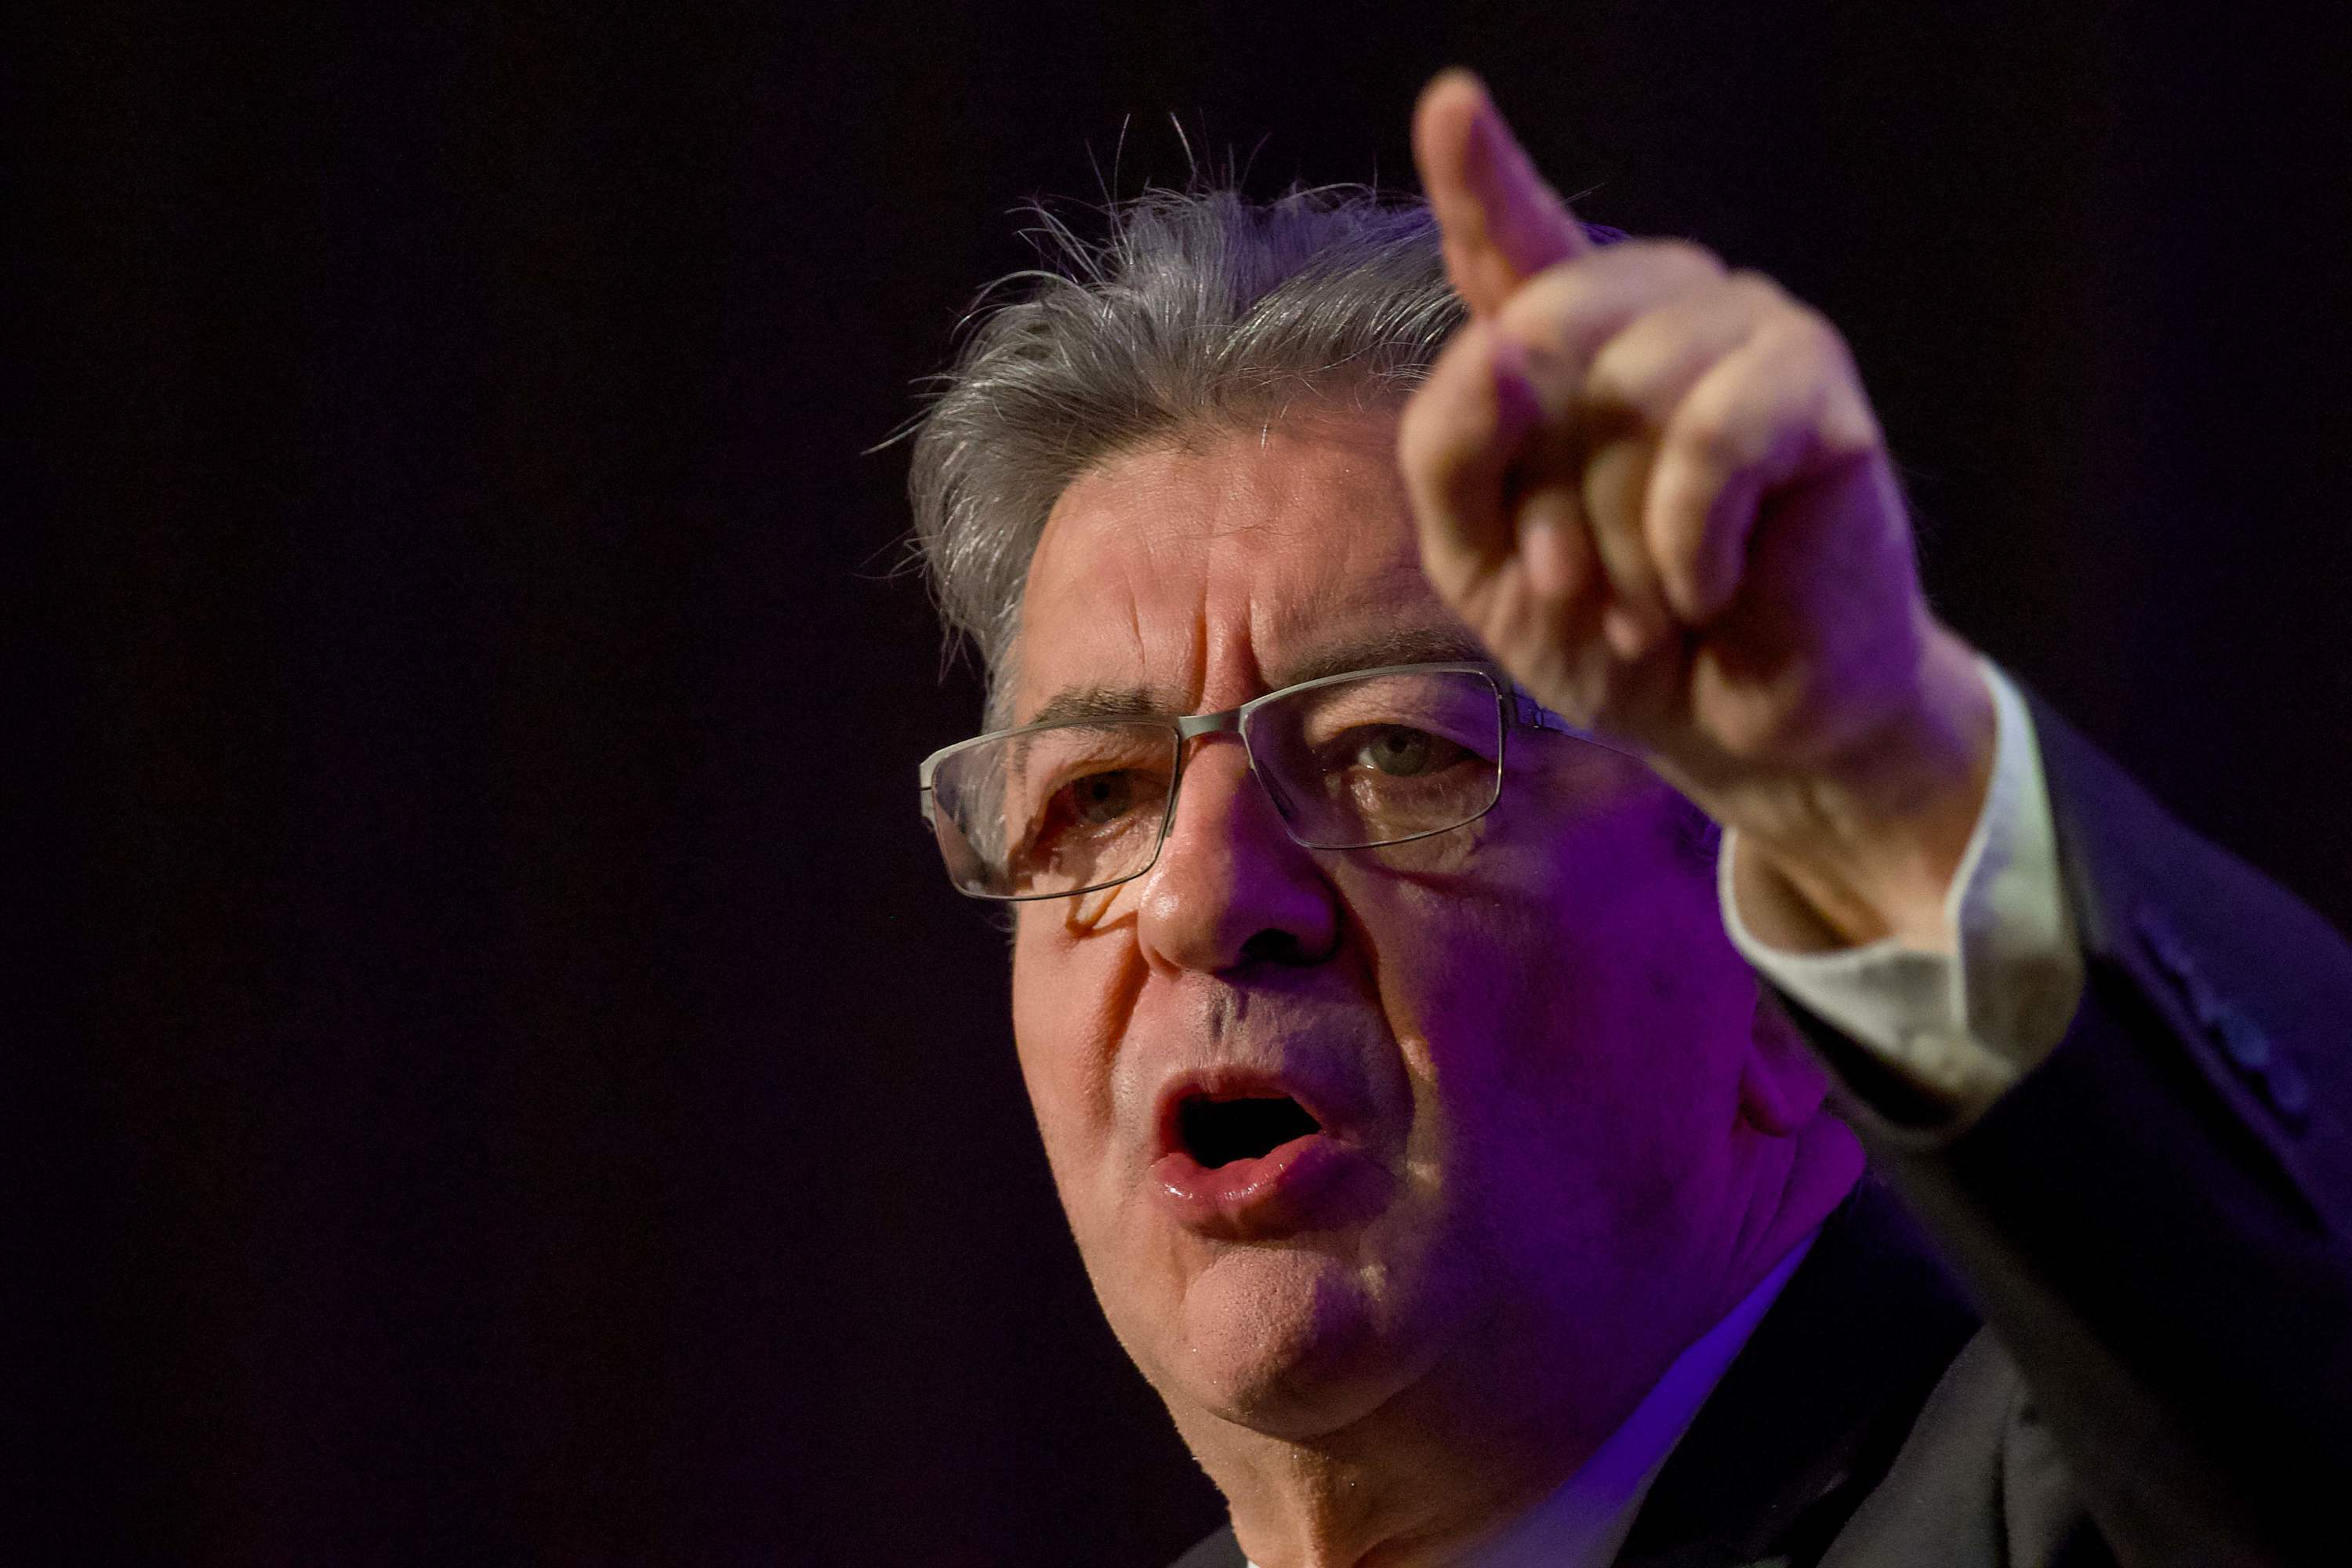 In Rennes, Jean-Luc Mélenchon advocates the implementation of “economic sanctions” against the Jewish state